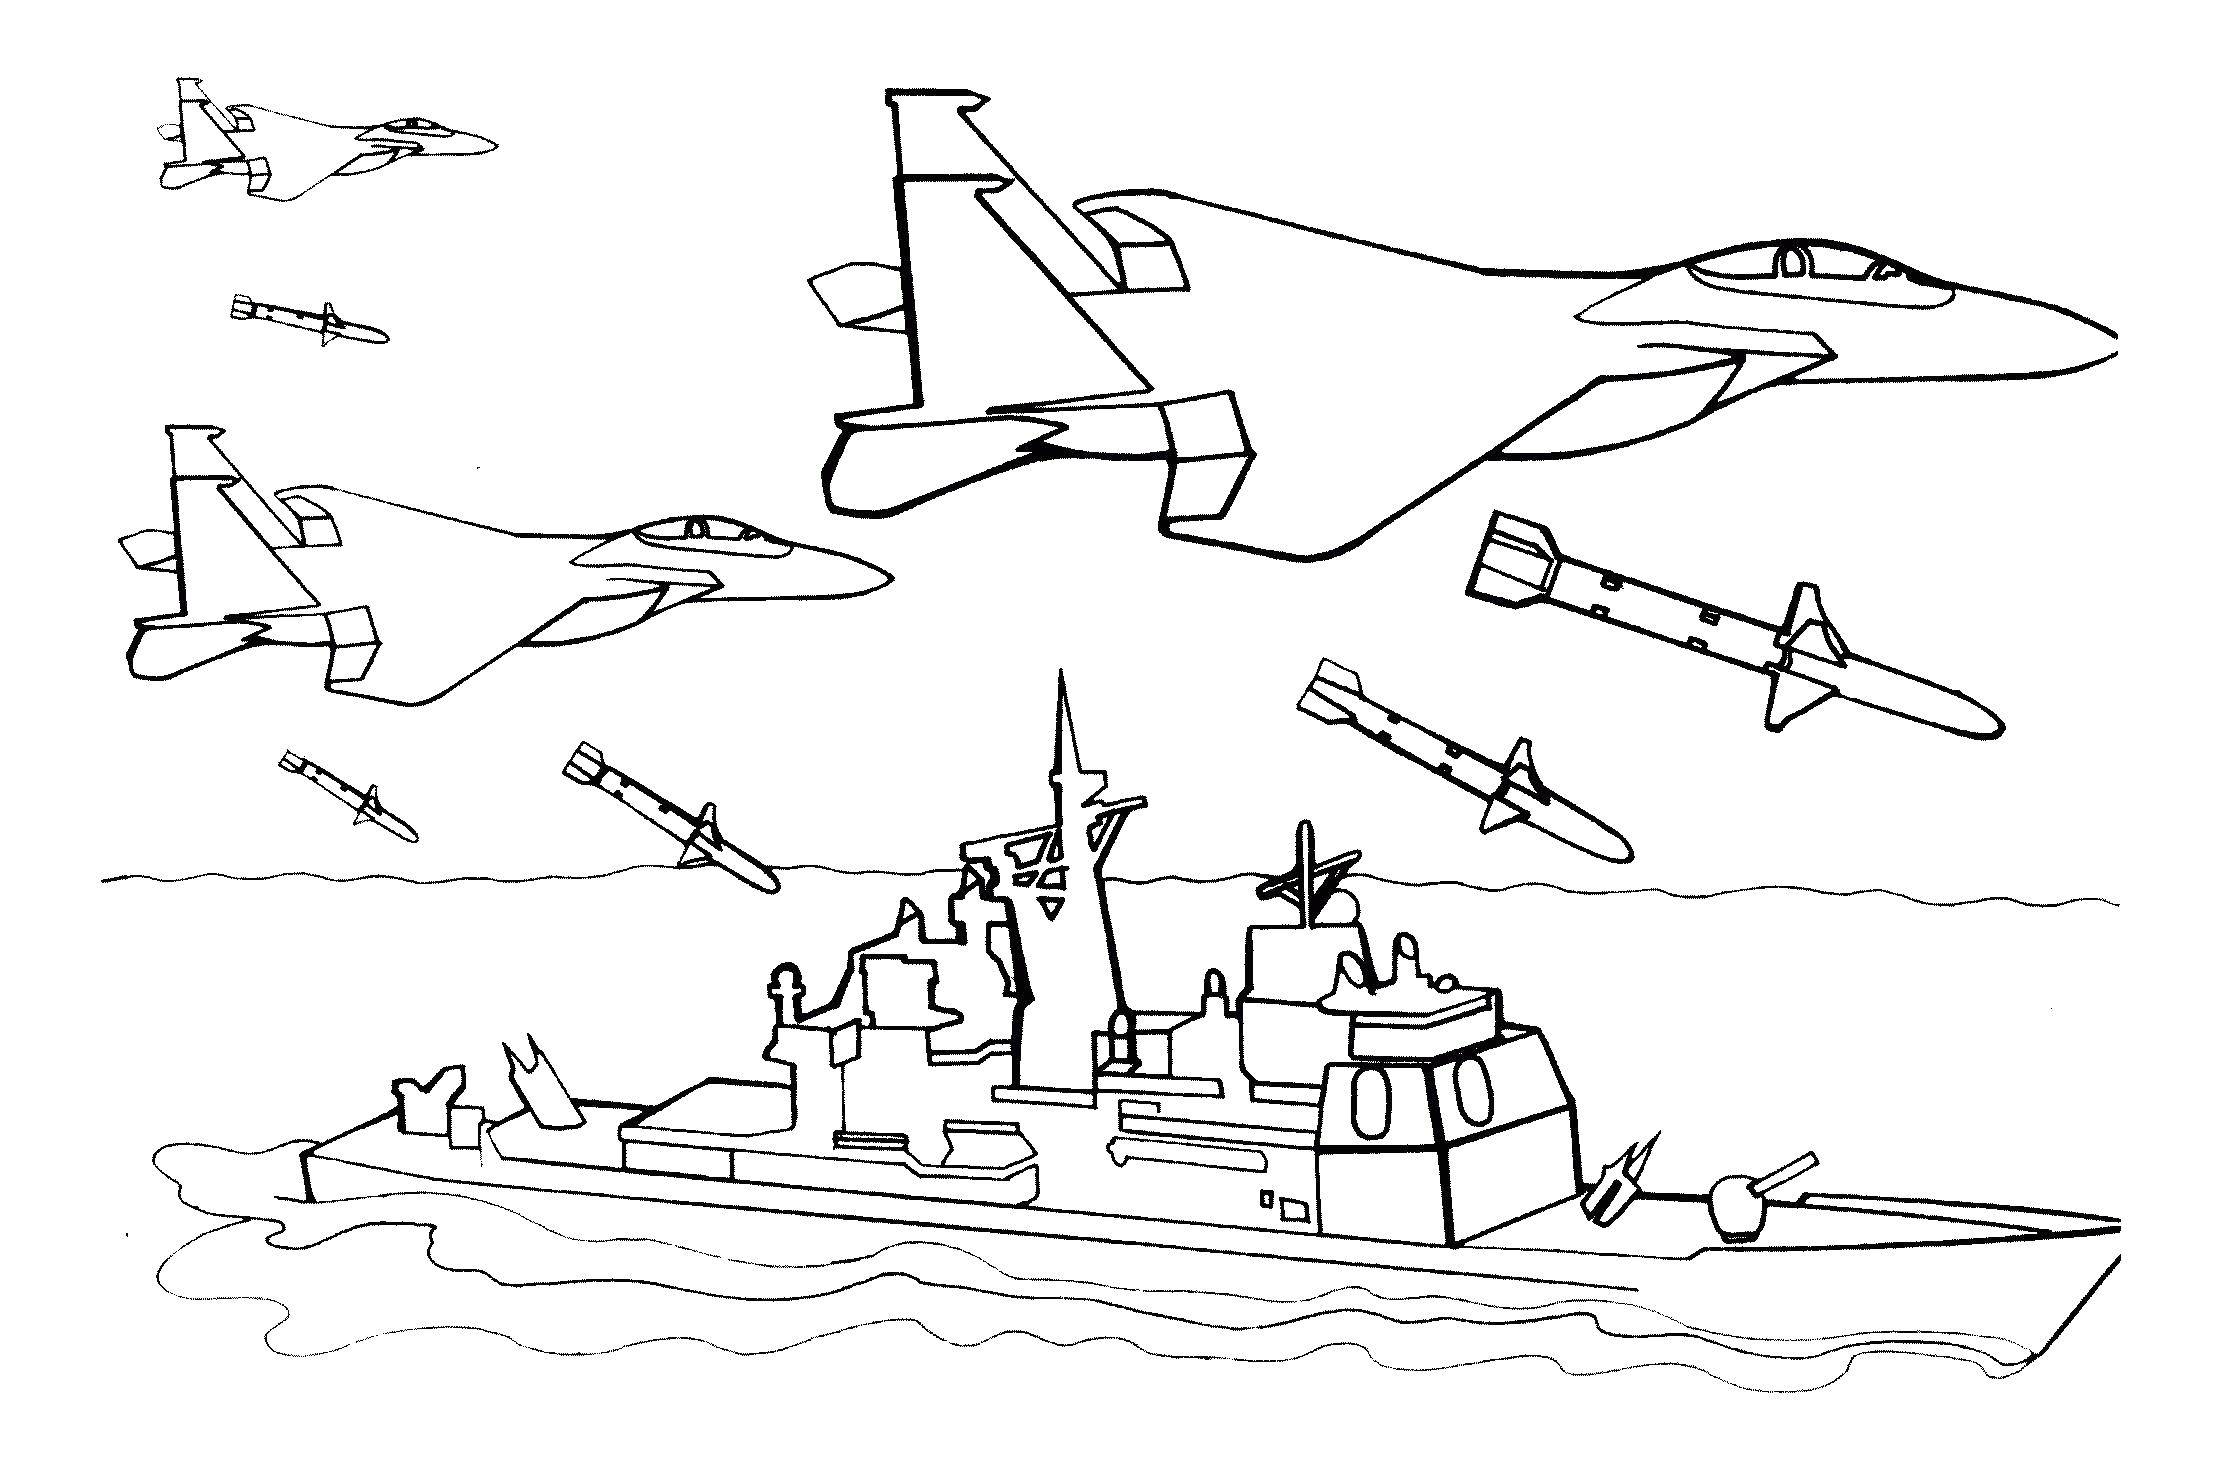 Coloring Military planes dropping missiles. Category military. Tags:  Military, plane, rocket, ship.